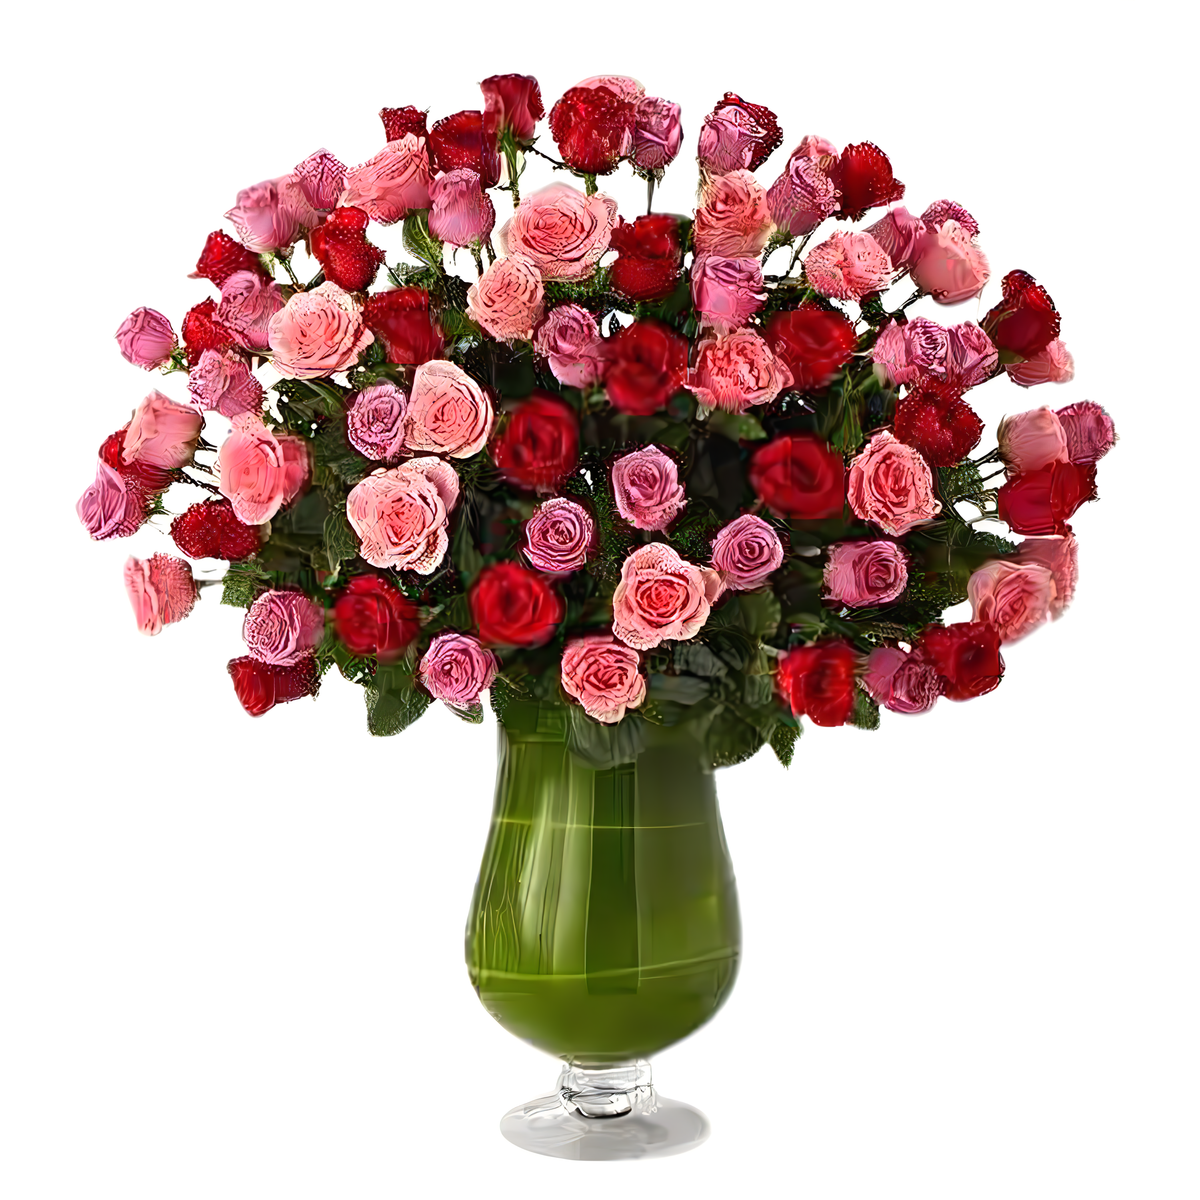 Luxury Rose Bouquet - 24 Premium Red, Pink, &amp; Lavender Long-Stem Roses - Products &gt; Luxury Collection